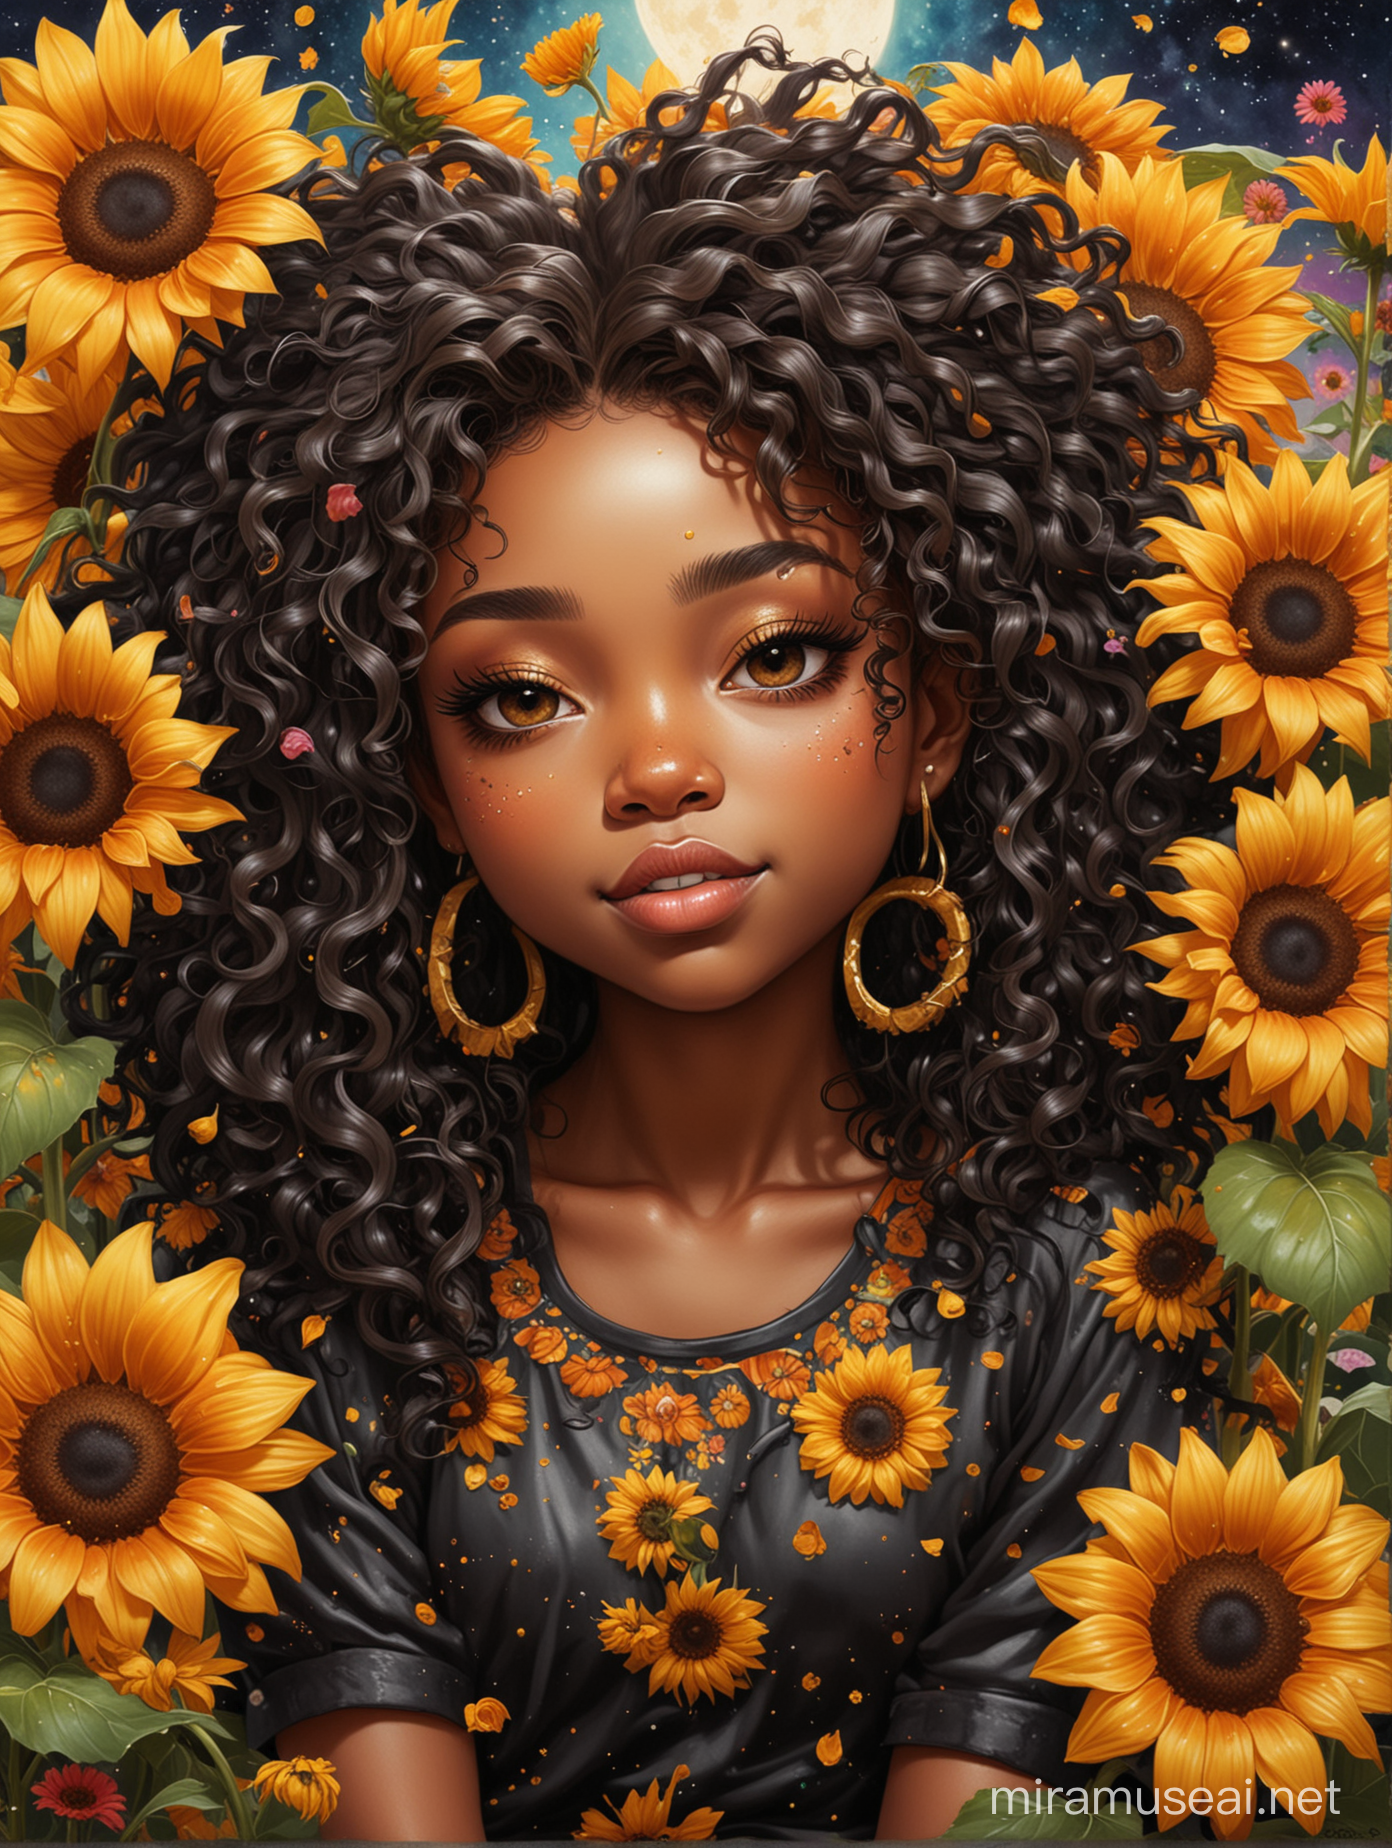 Chibi Black Girl in Leo Symbol Surrounded by Sunflowers